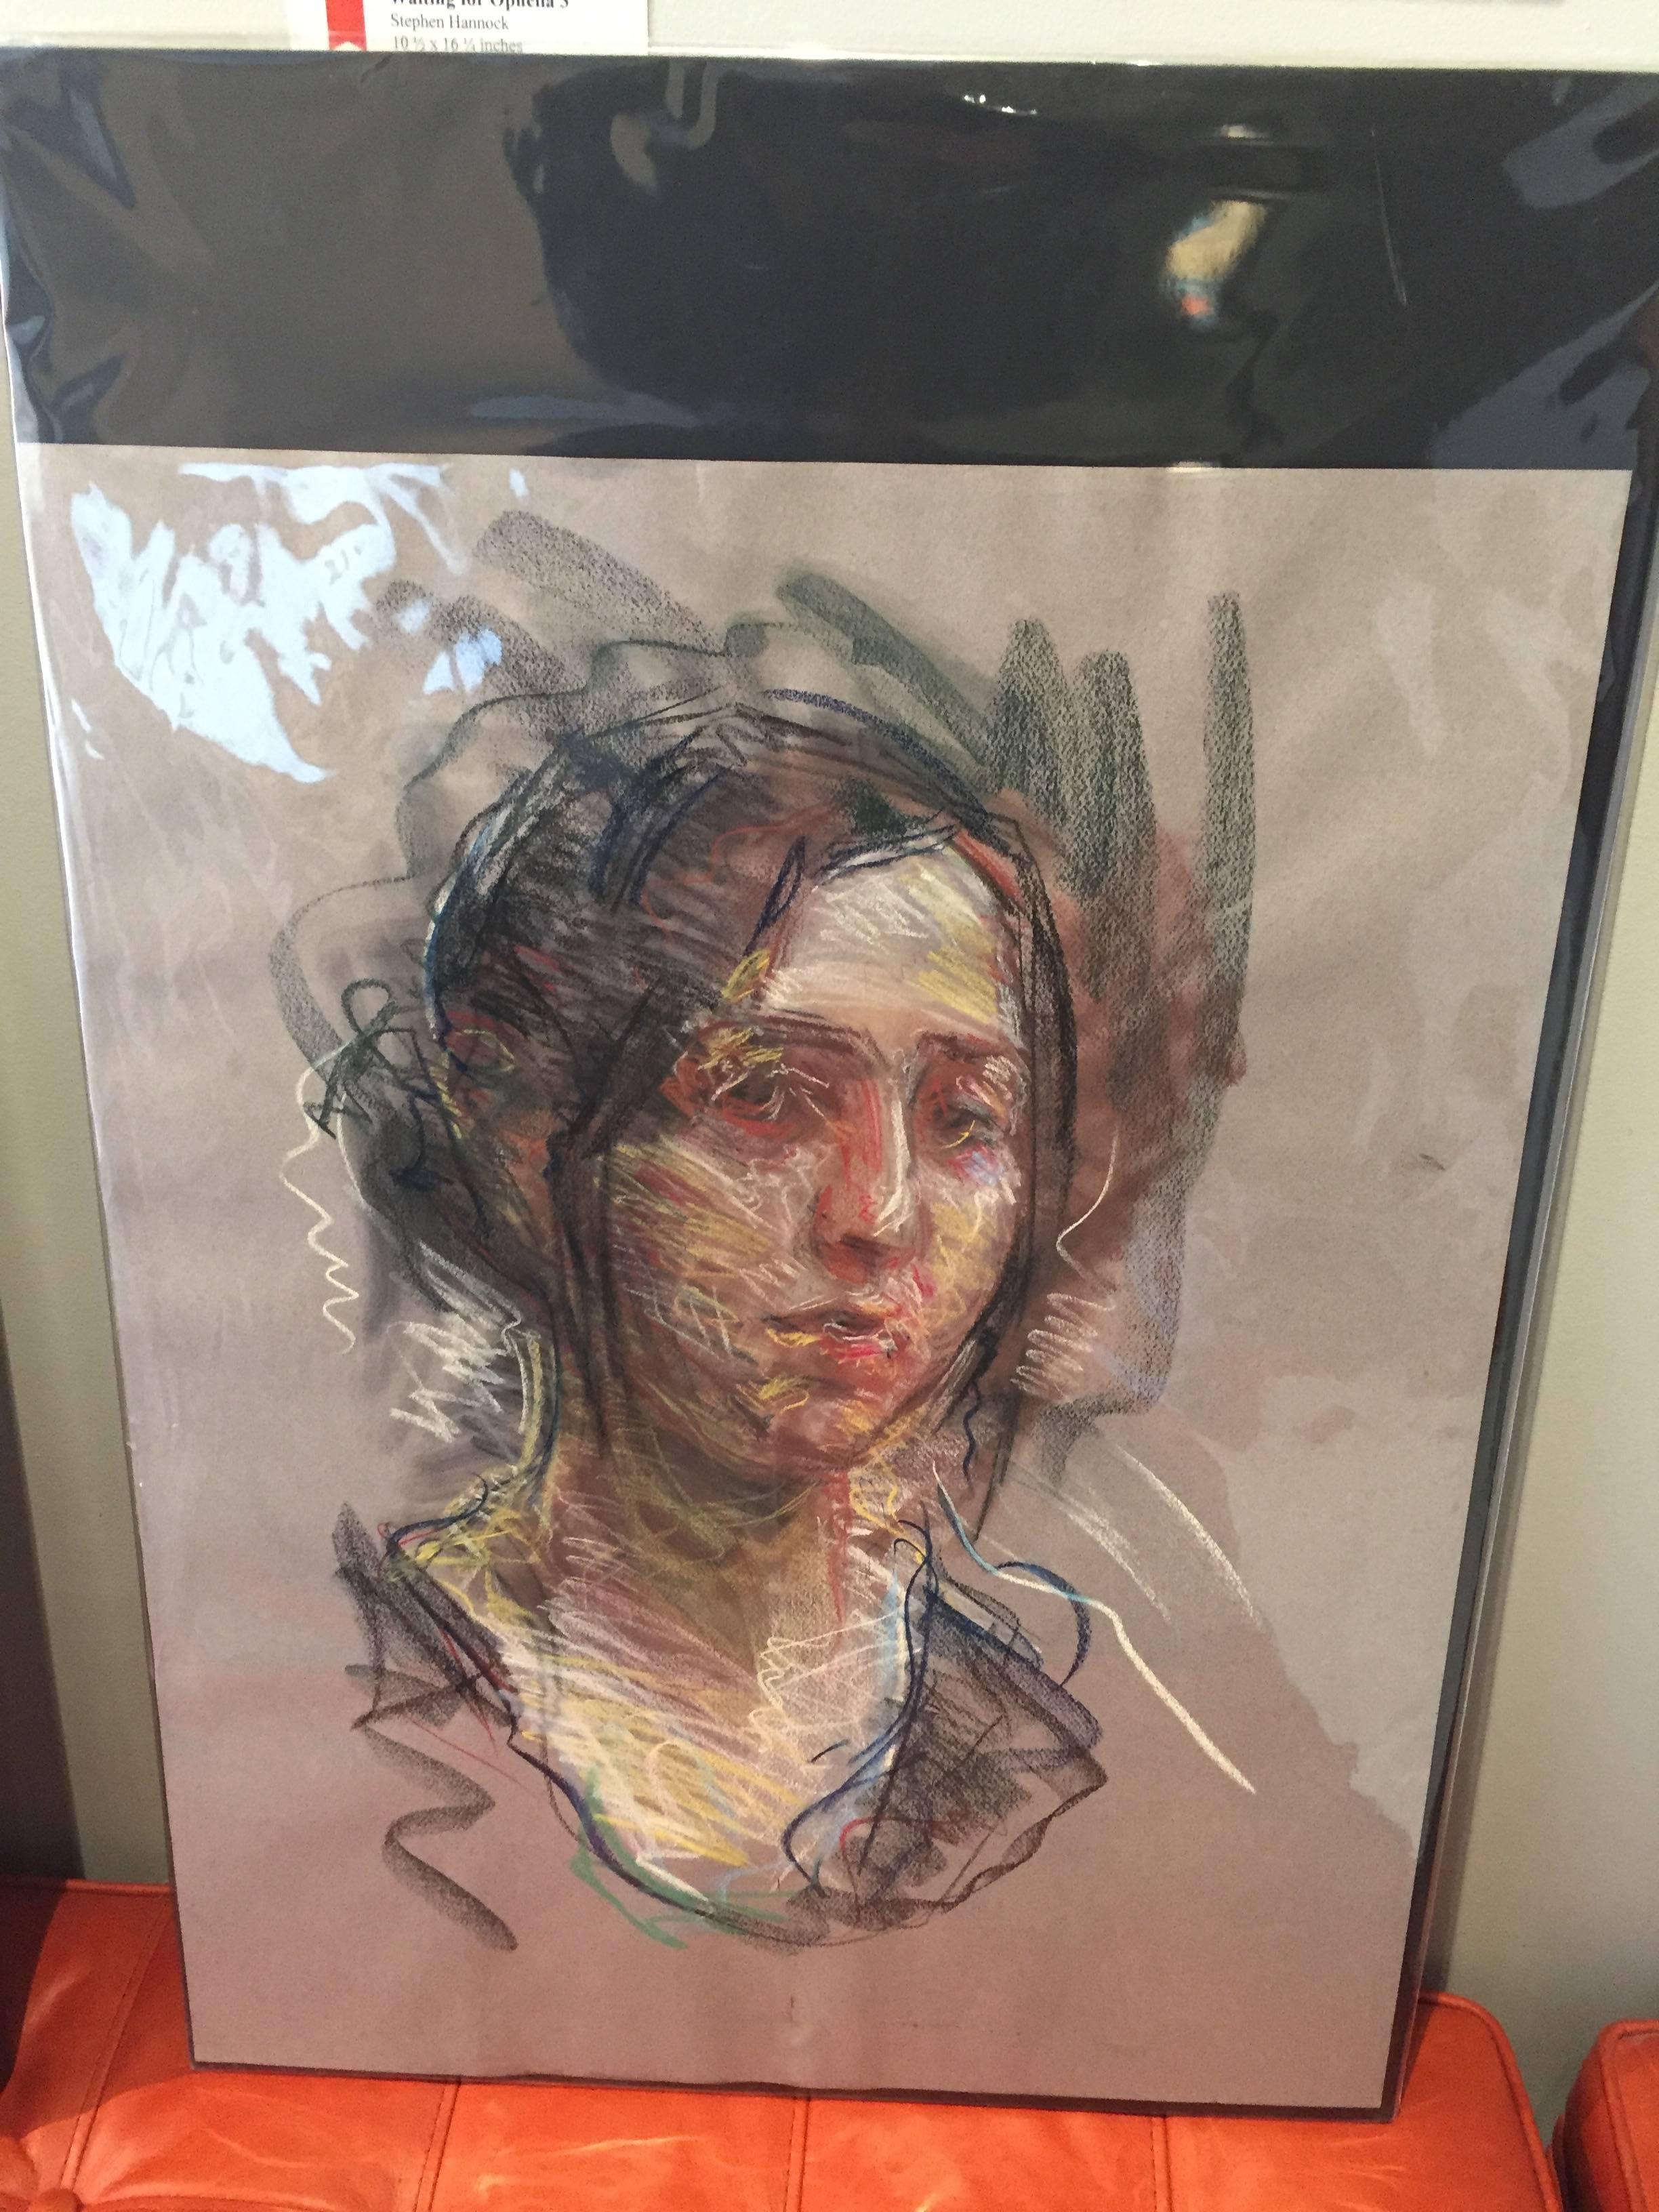 A rare work on paper by Ben Fenske. Drawn using conte crayon from direct observation, Fenske uses classical drafting techniques to capture this portrait of a woman's face, slightly in profile. Fenske utilizes a motley of colors to illuminate her